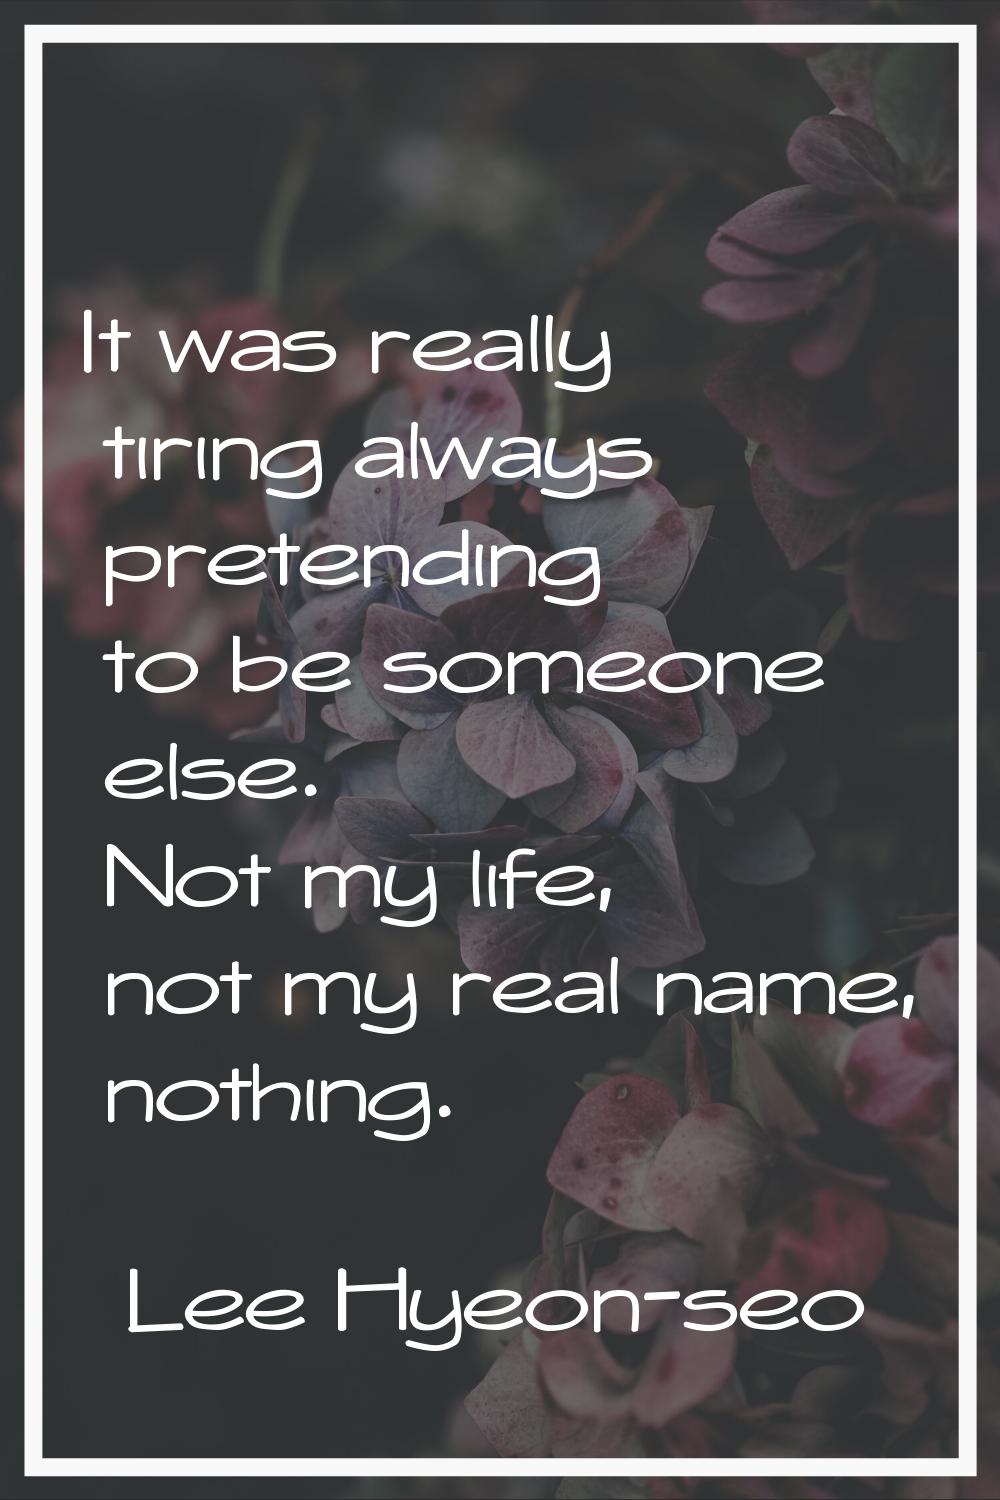 It was really tiring always pretending to be someone else. Not my life, not my real name, nothing.